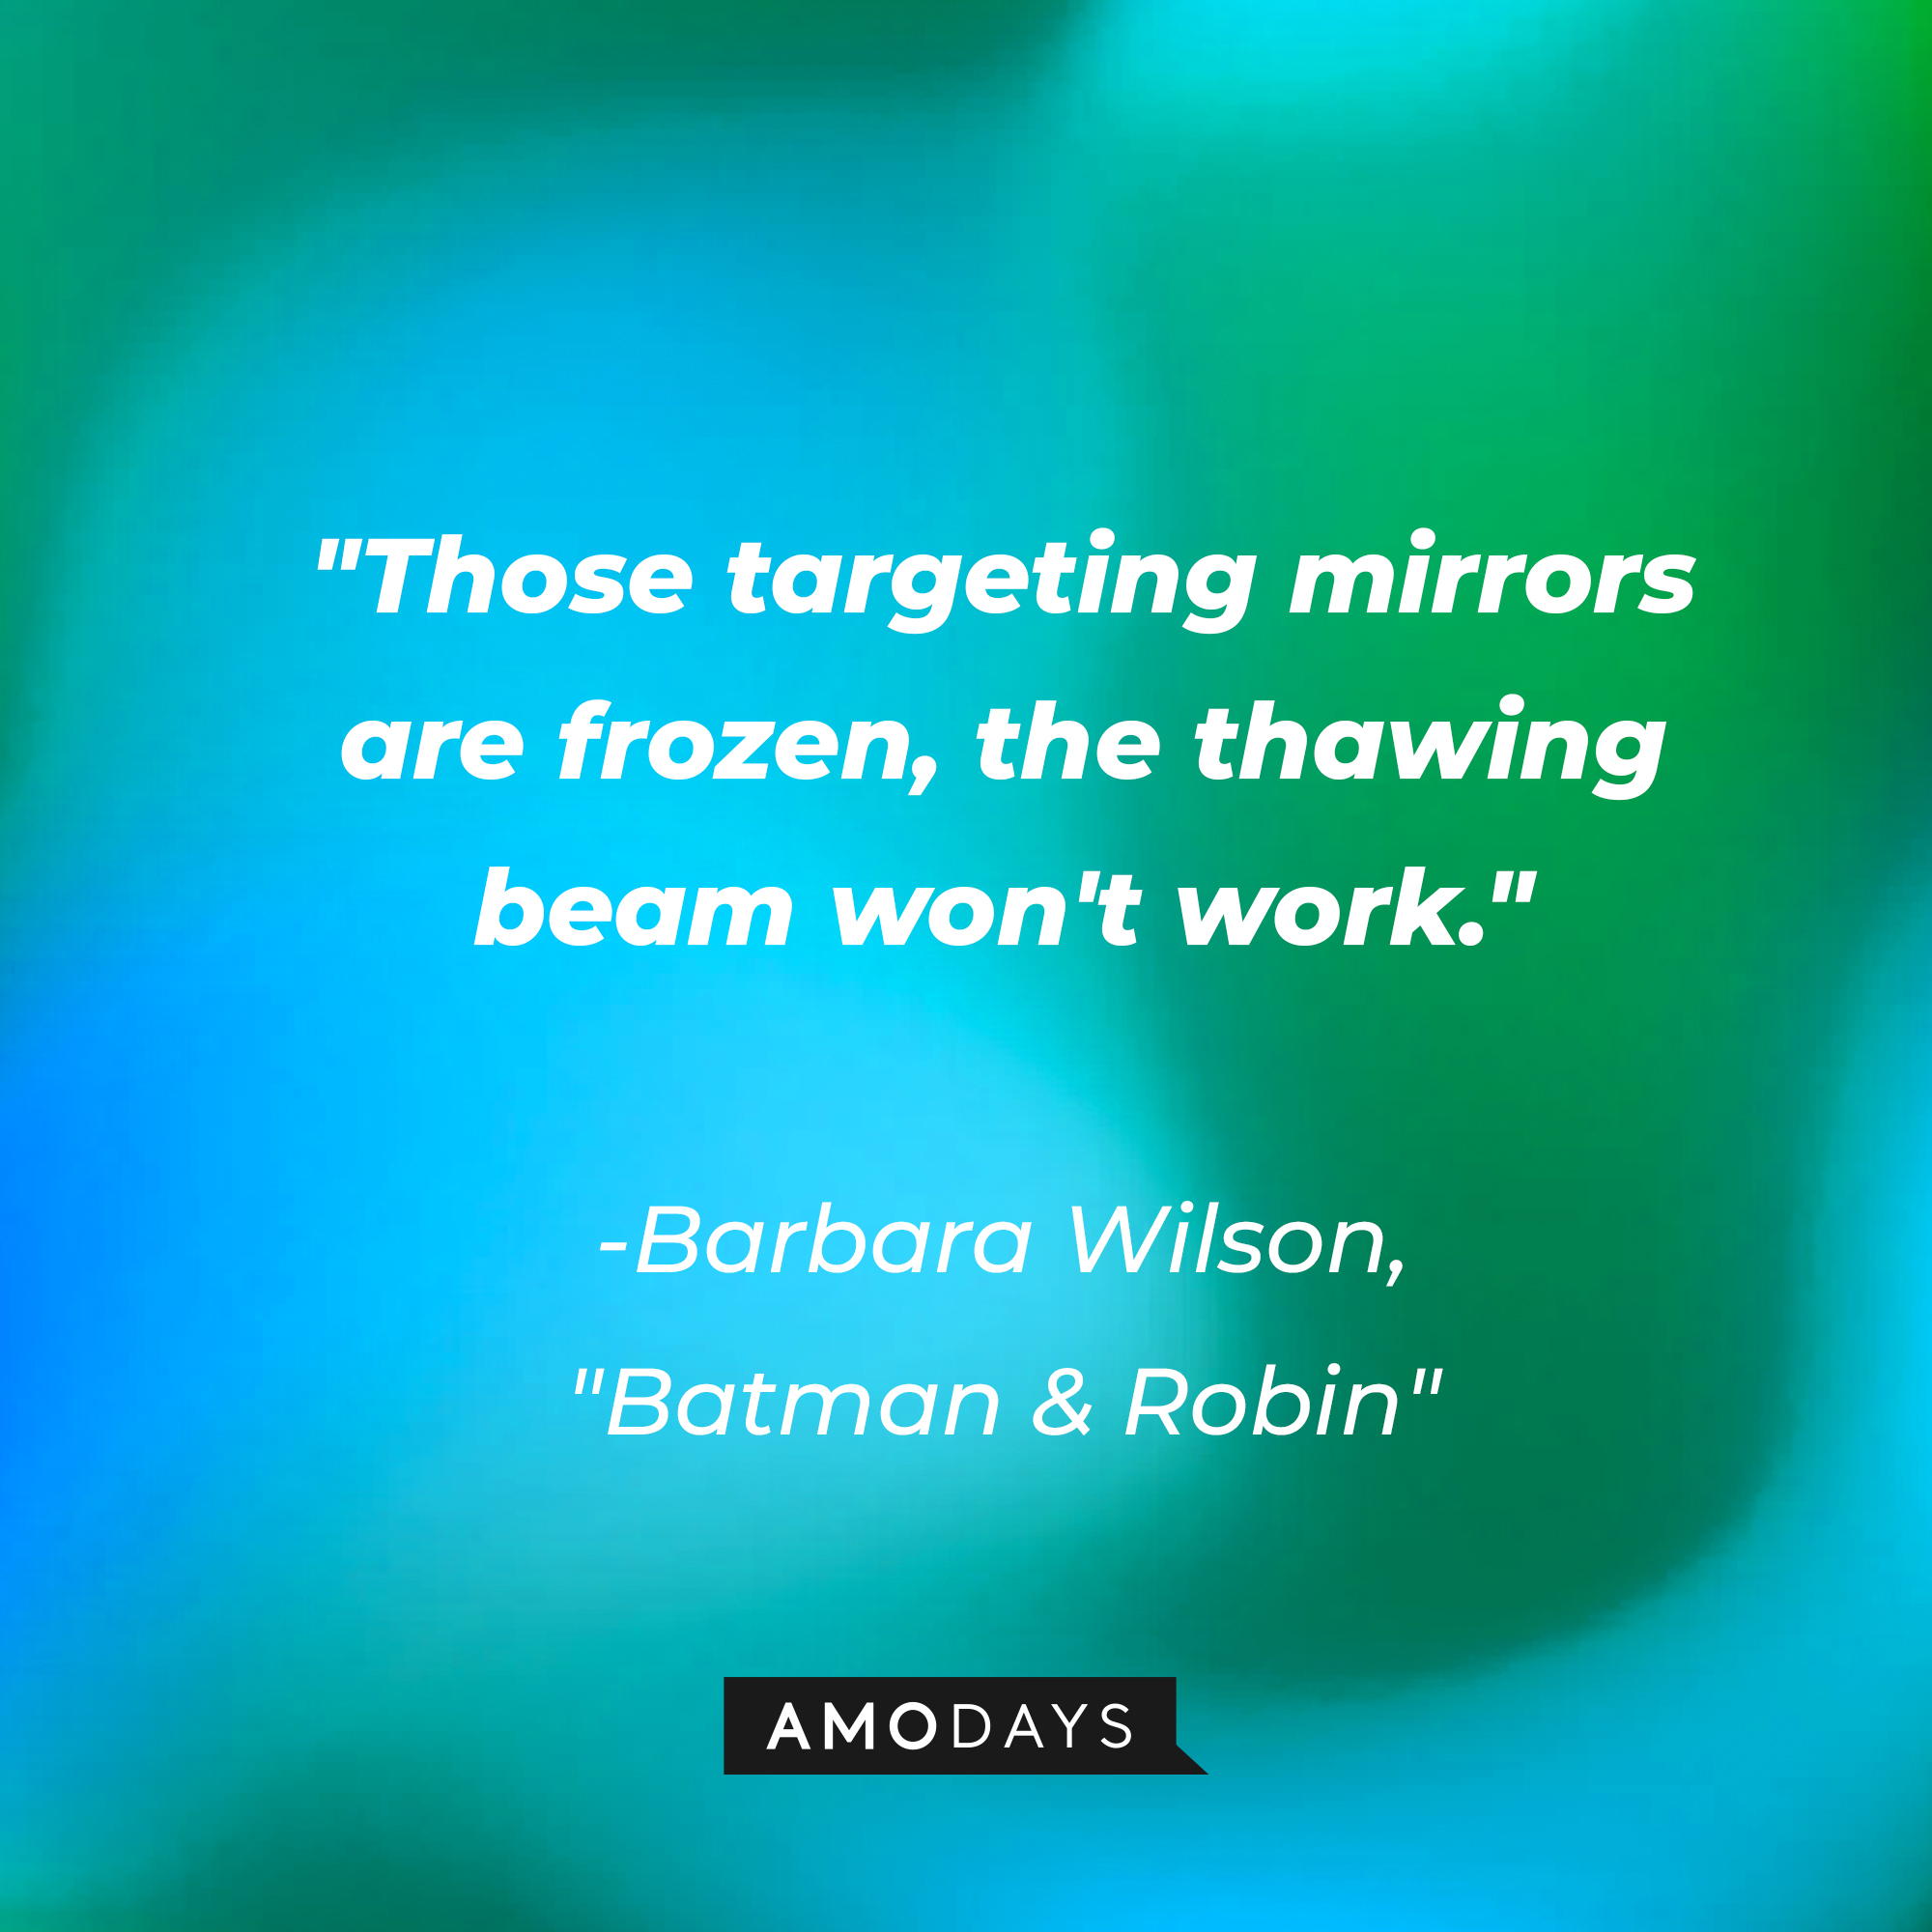 Barbara Wilson's quote from the "Batman & Robin" film: "Those targeting mirrors are frozen, the thawing beam won't work." | Source: AmoDays